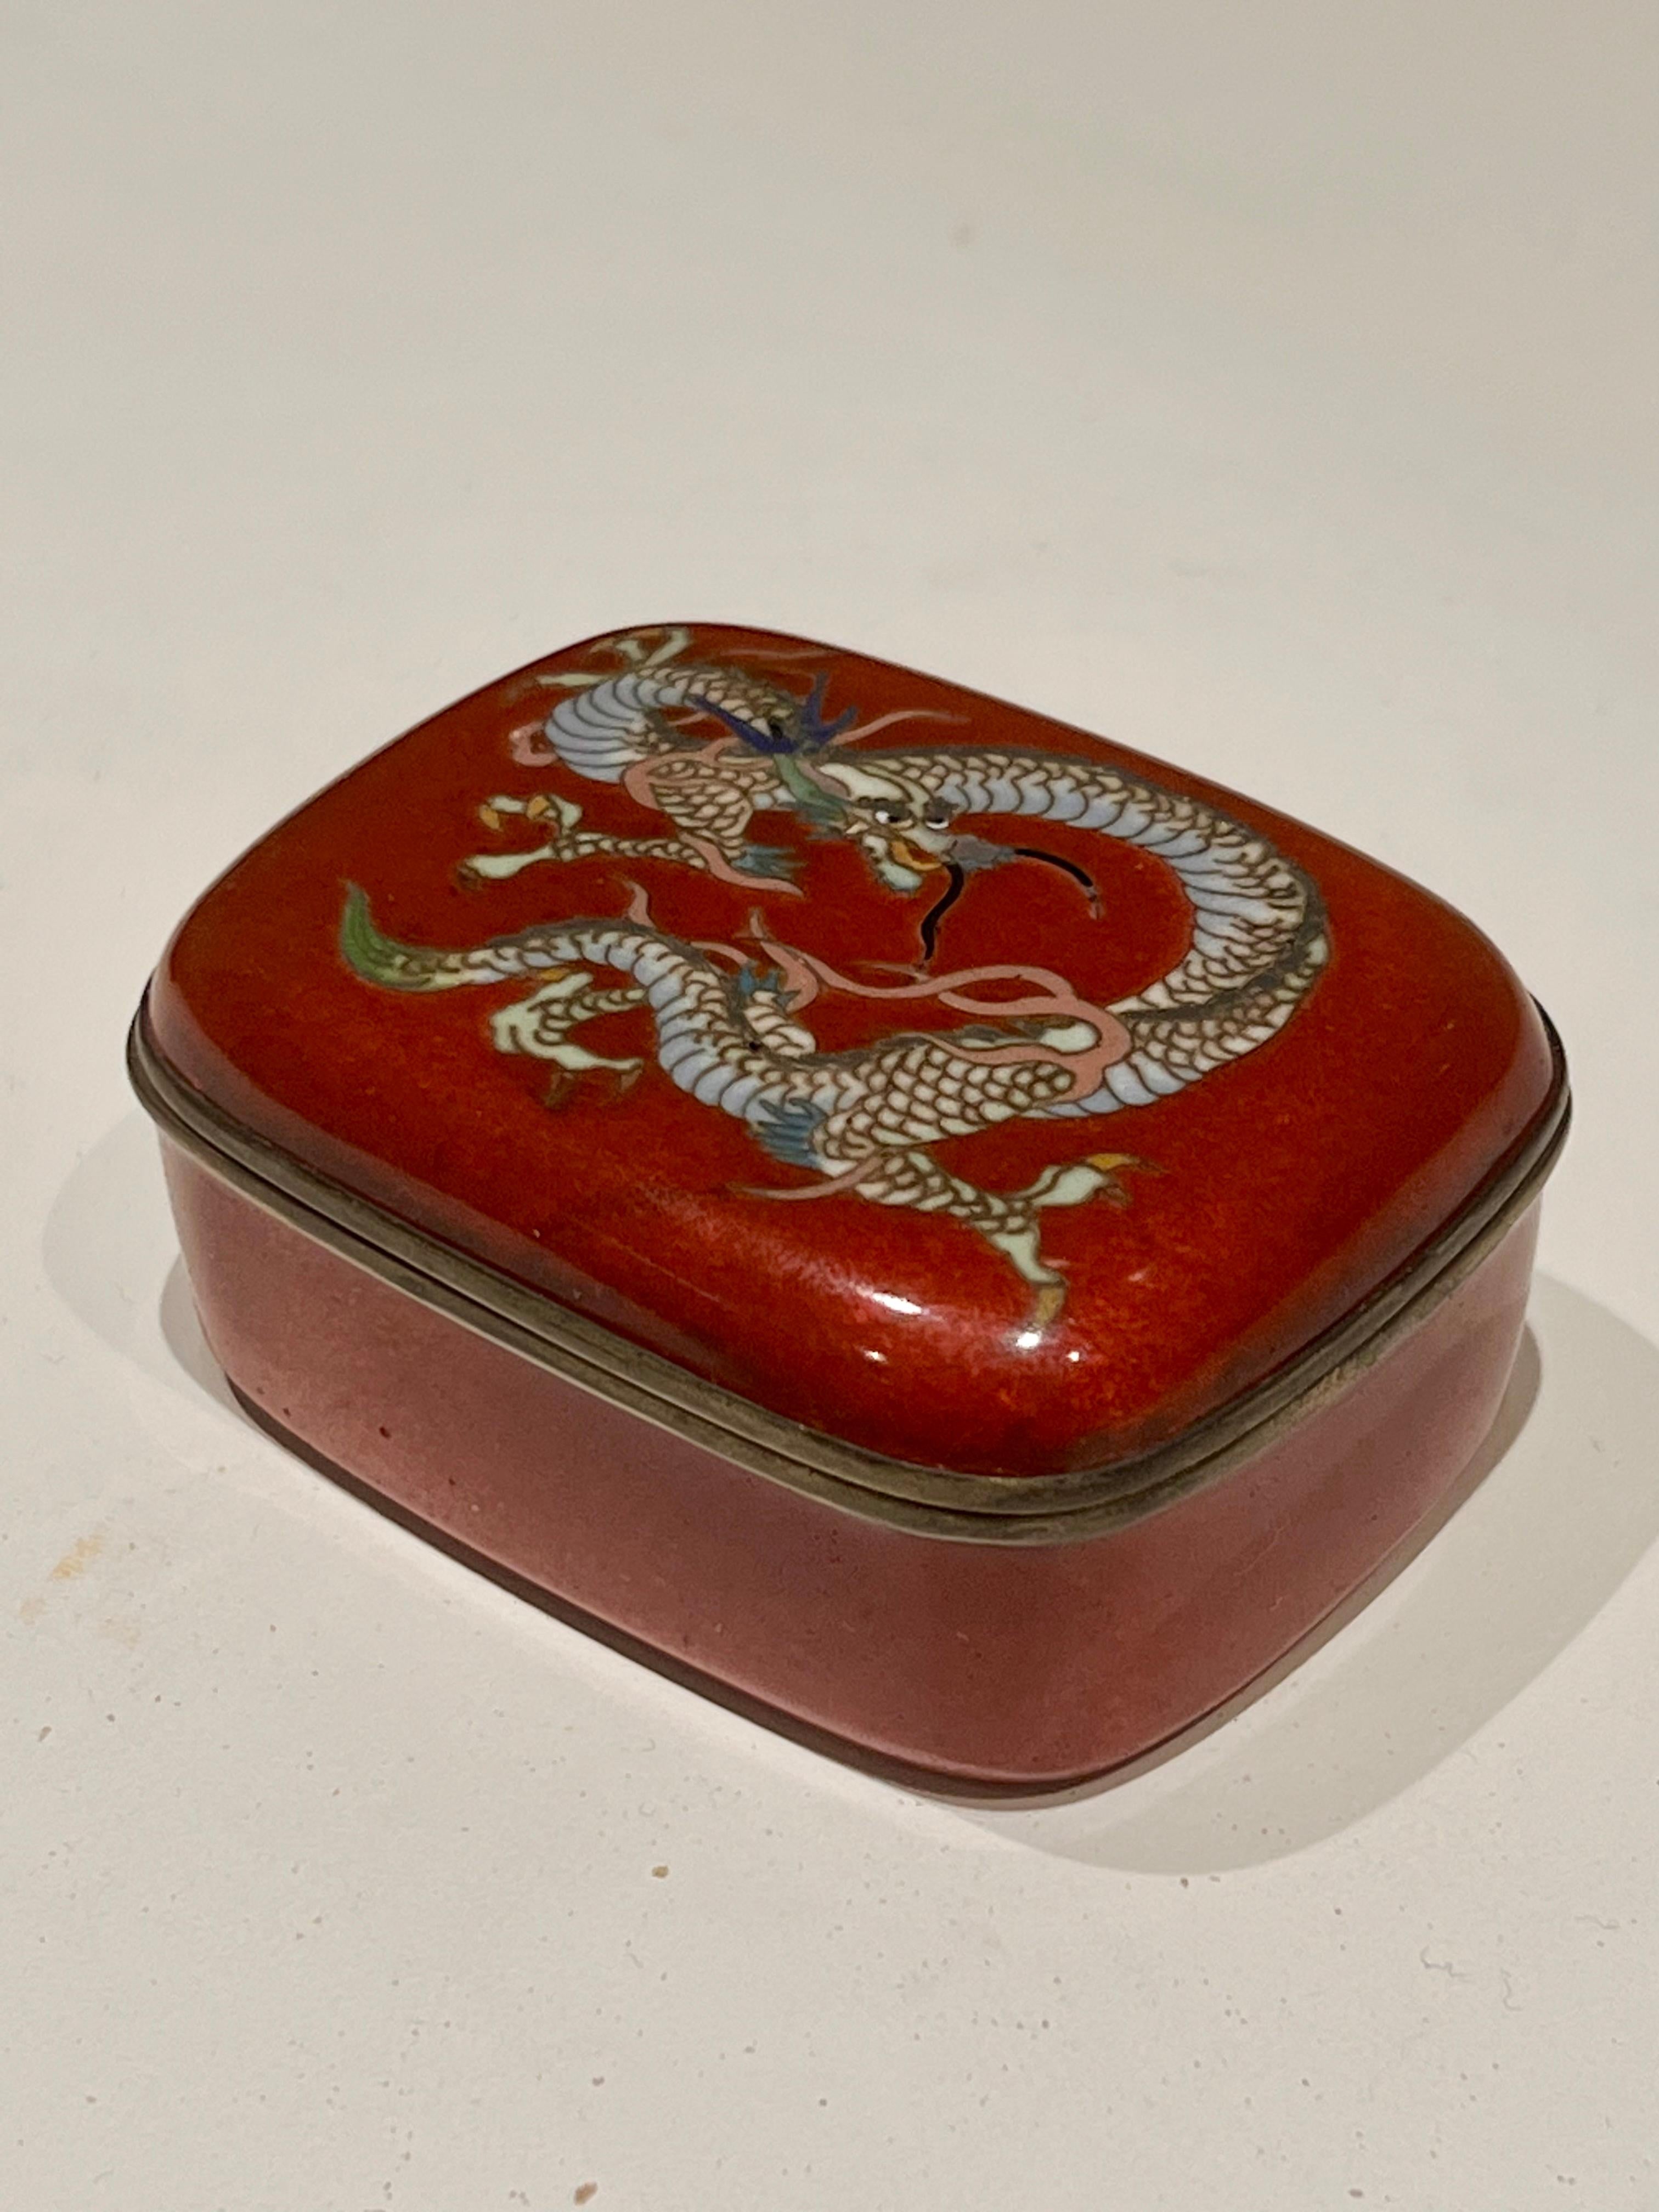 Exquisite Japanese Cloisonne Enamel Box and Cover. 19th C For Sale 2